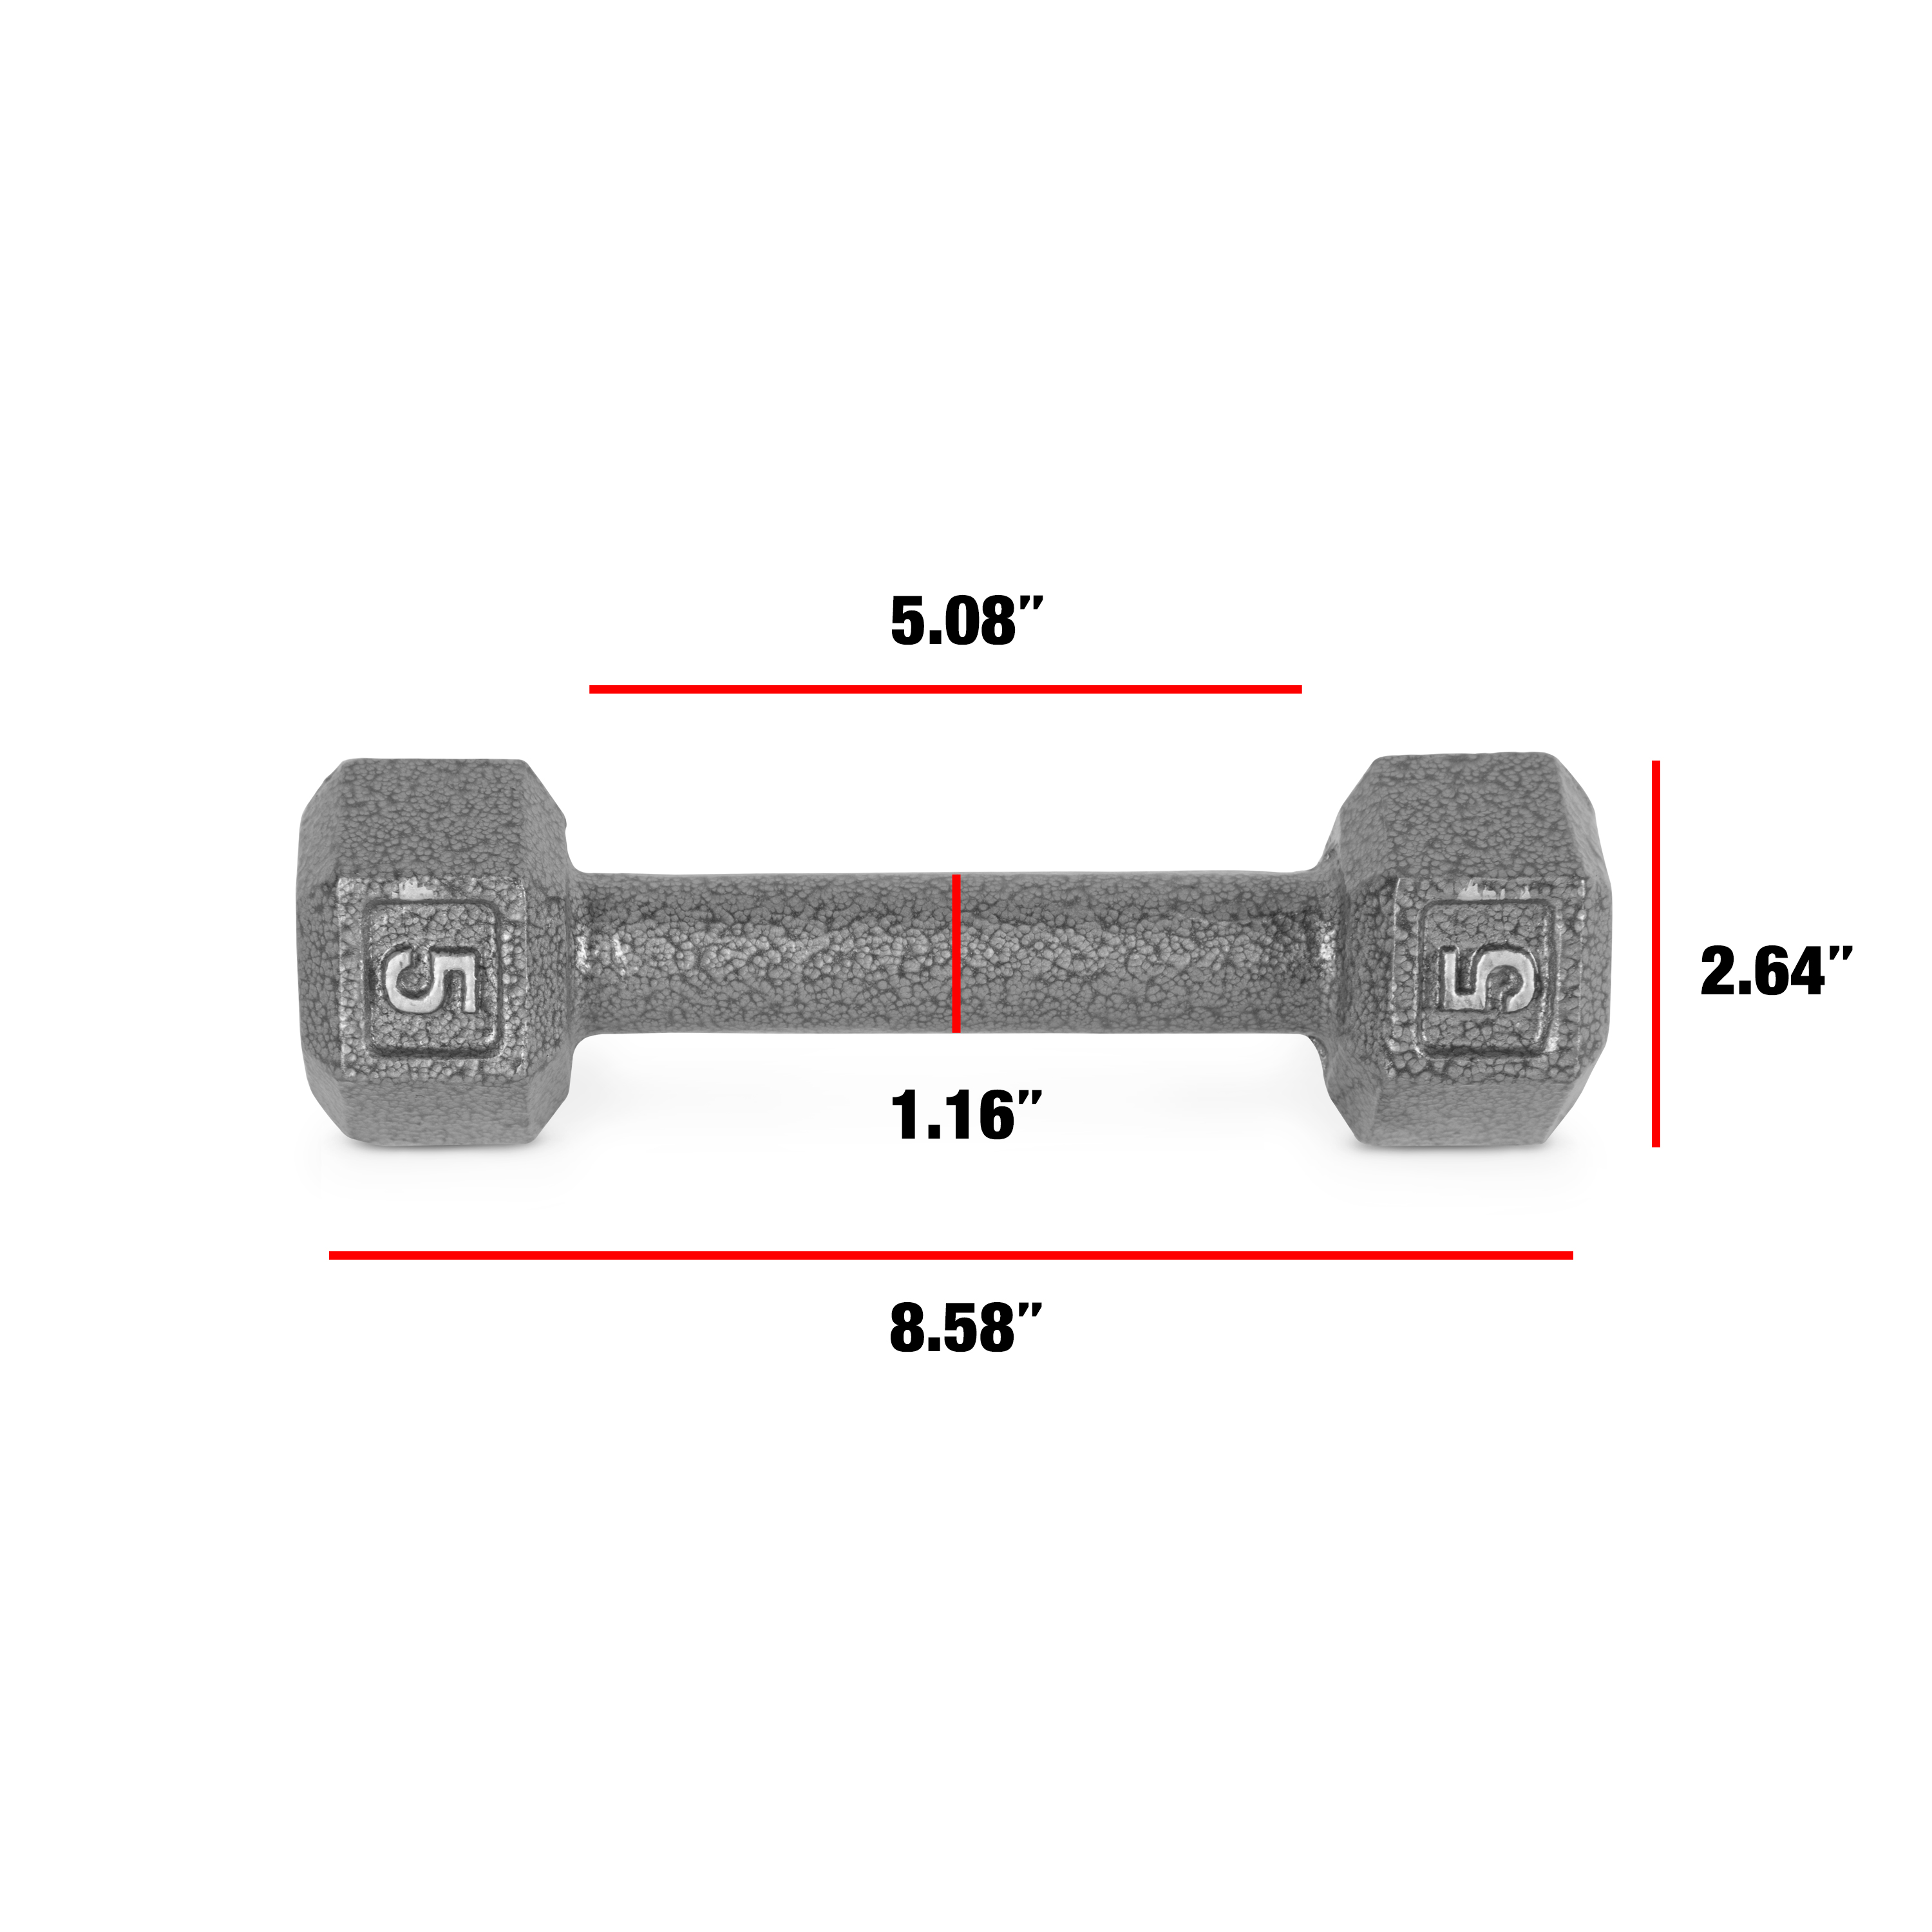 CAP Barbell 5lb Cast Iron Hex Dumbbell, Single - image 3 of 6